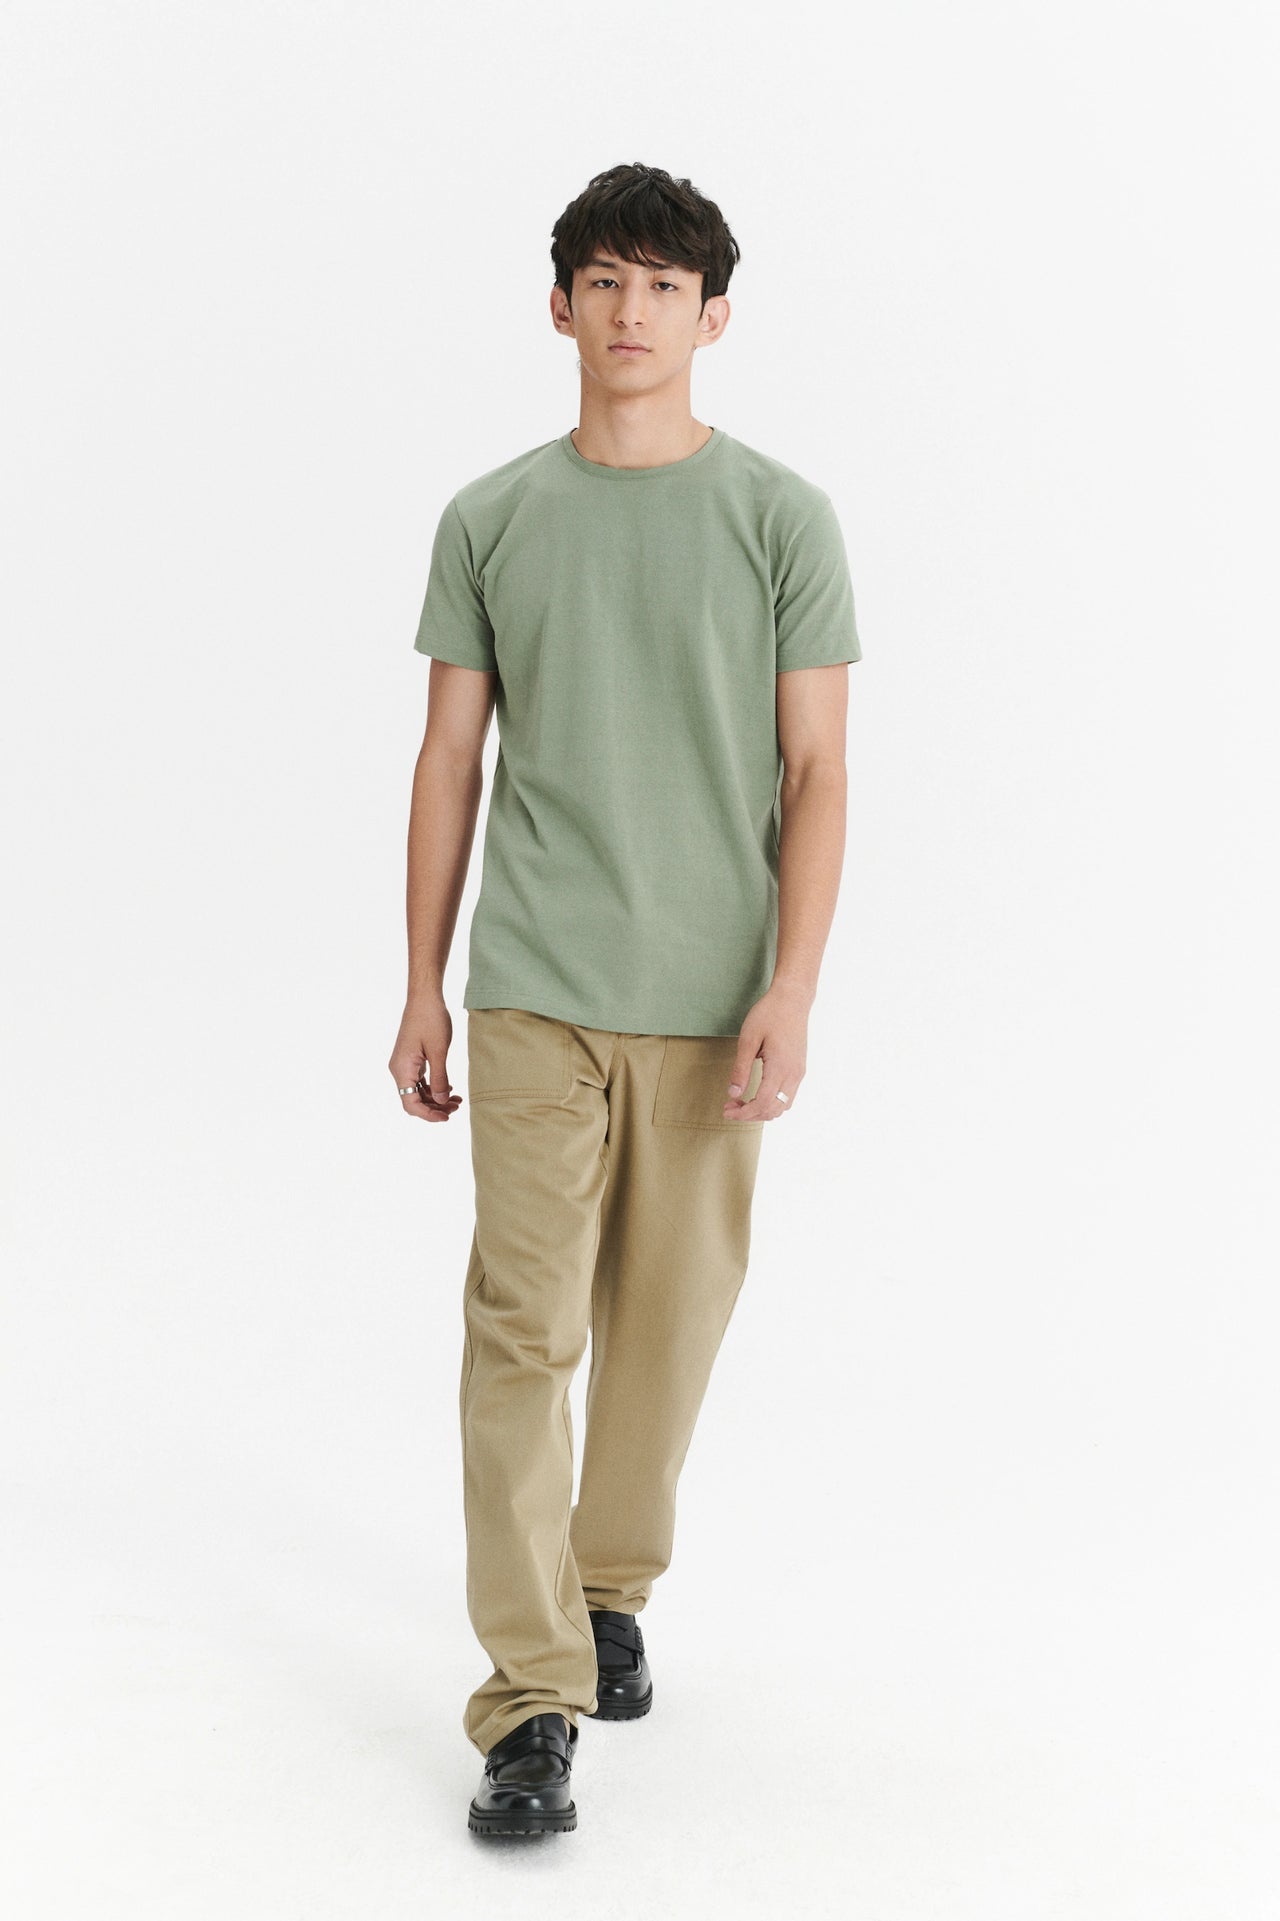 T-Shirt in a Green Sage Japanese Cotton Jersey